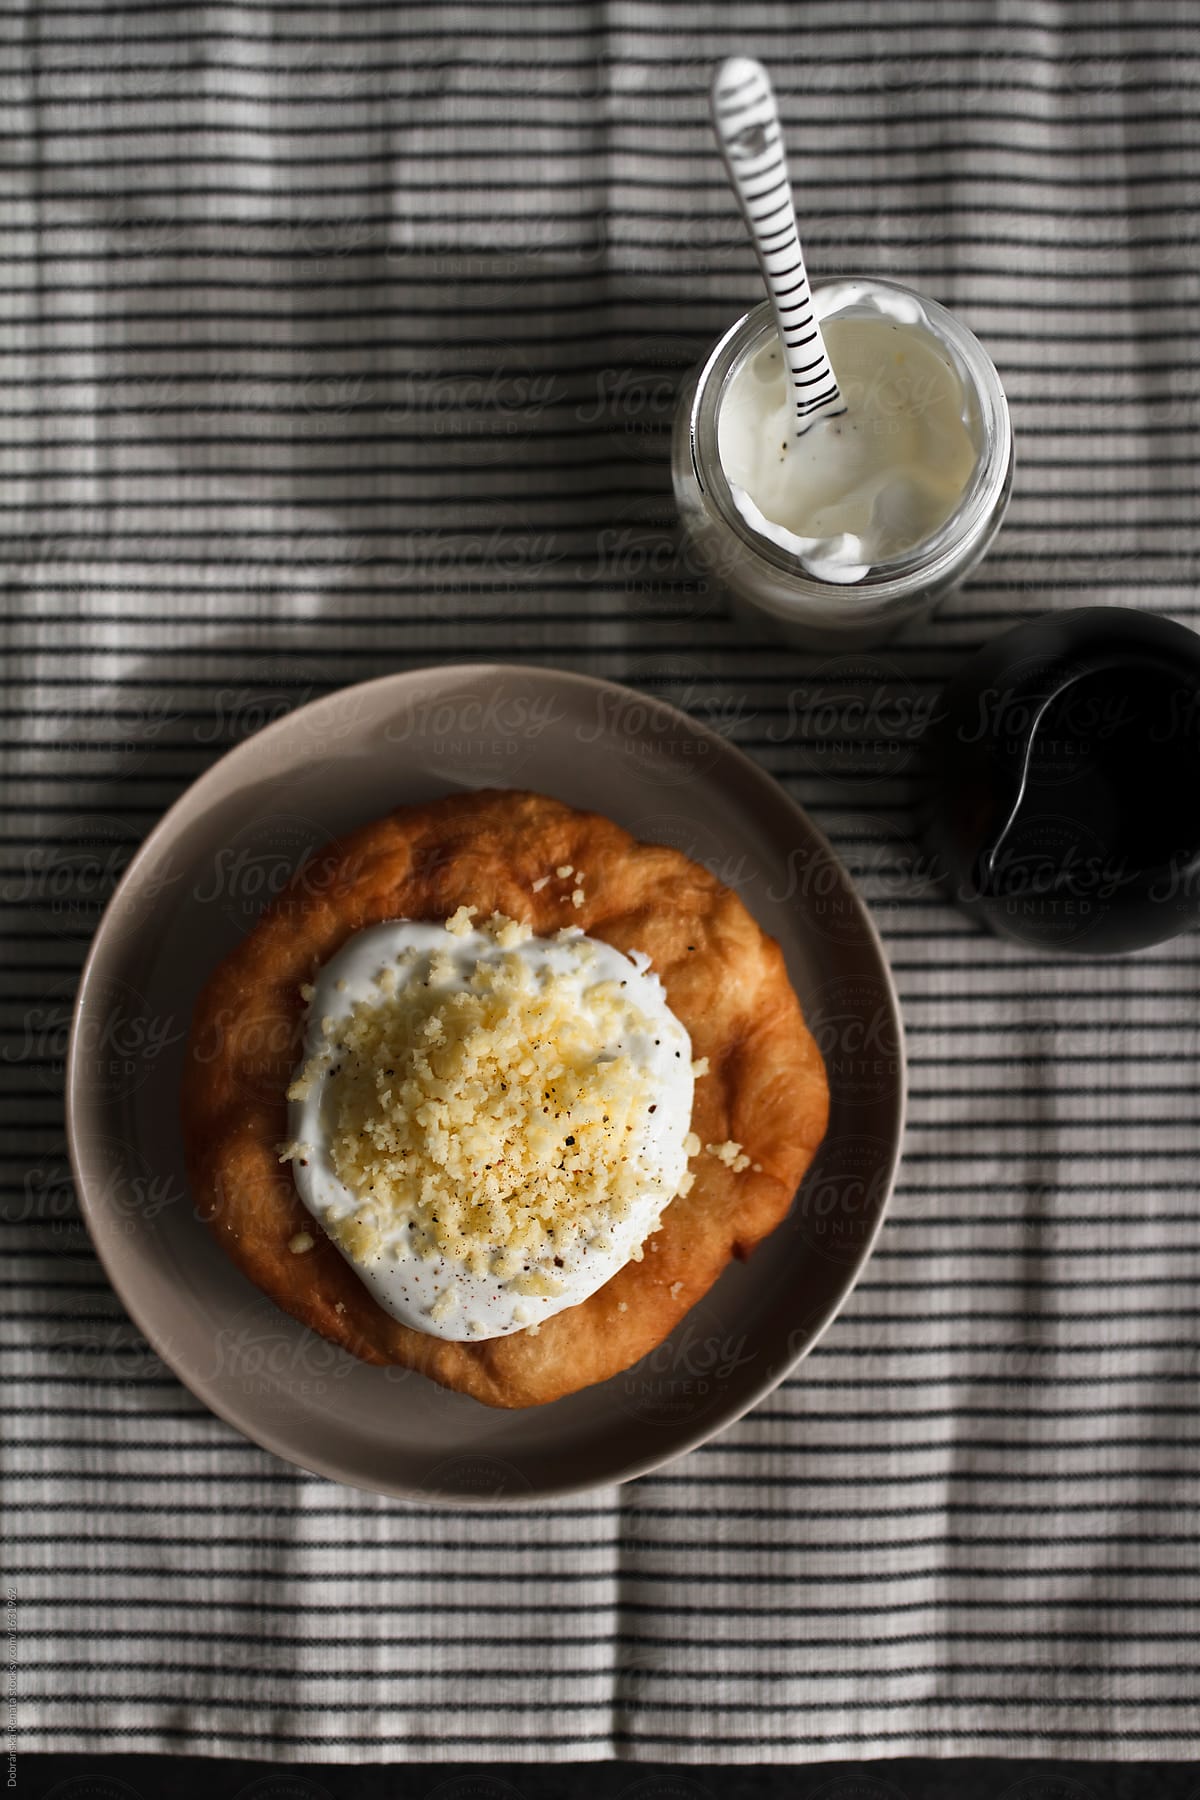 Langos (fried Hungarian flatbread with sour cream and grated cheese)